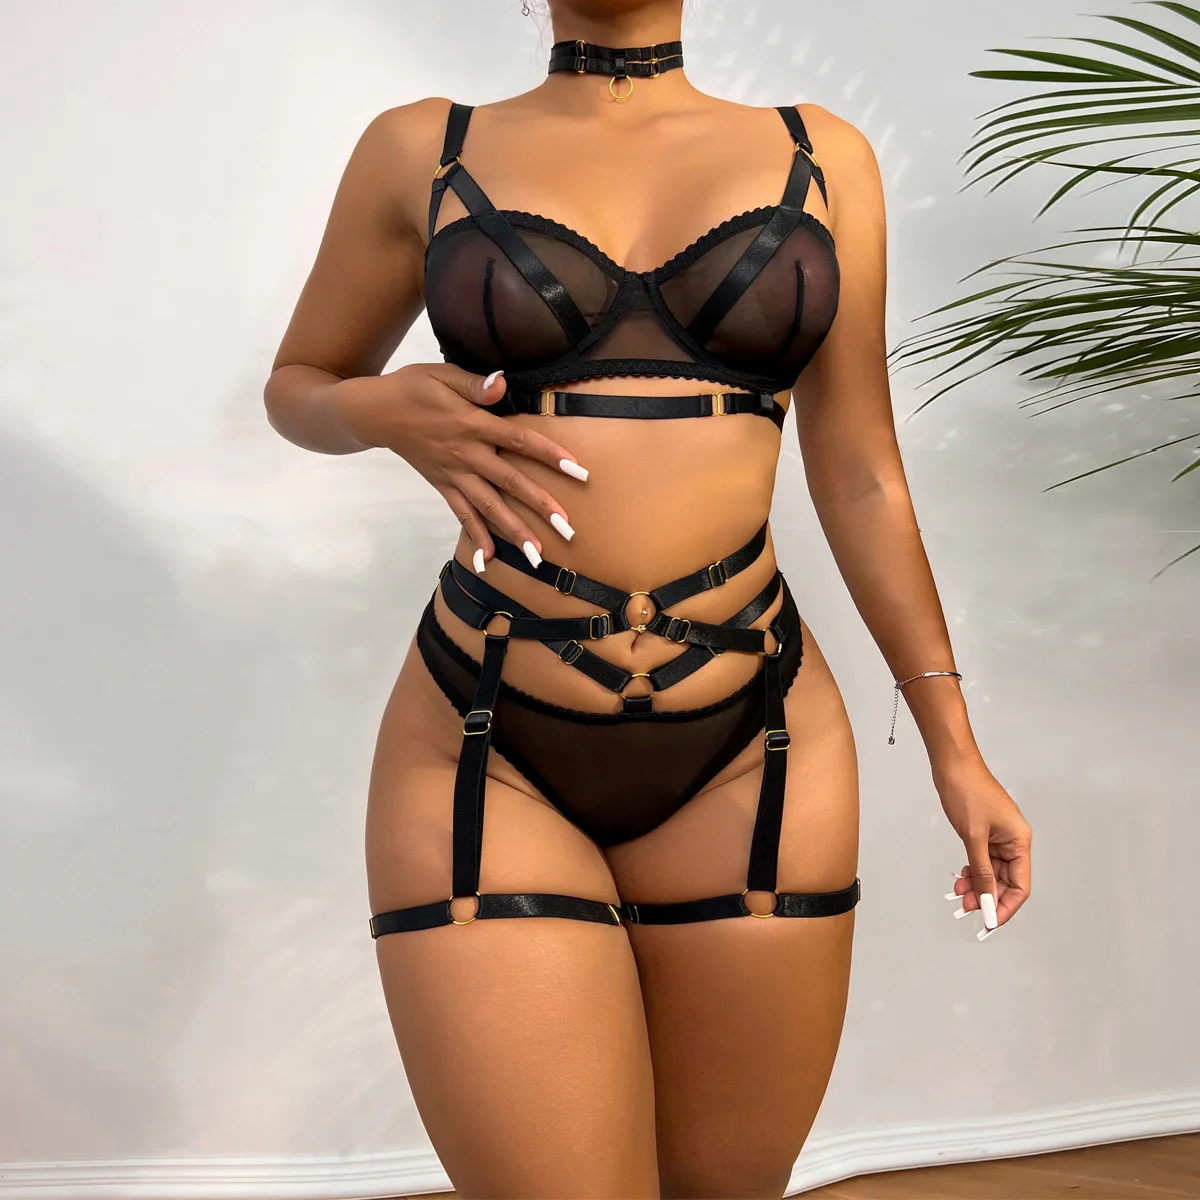 Black Intimate Womens Bra and Underwear Transparent Panty Set See Through Lace Erotic Costume Four Piece Sissy Lingerie Suit cheap underwear sets